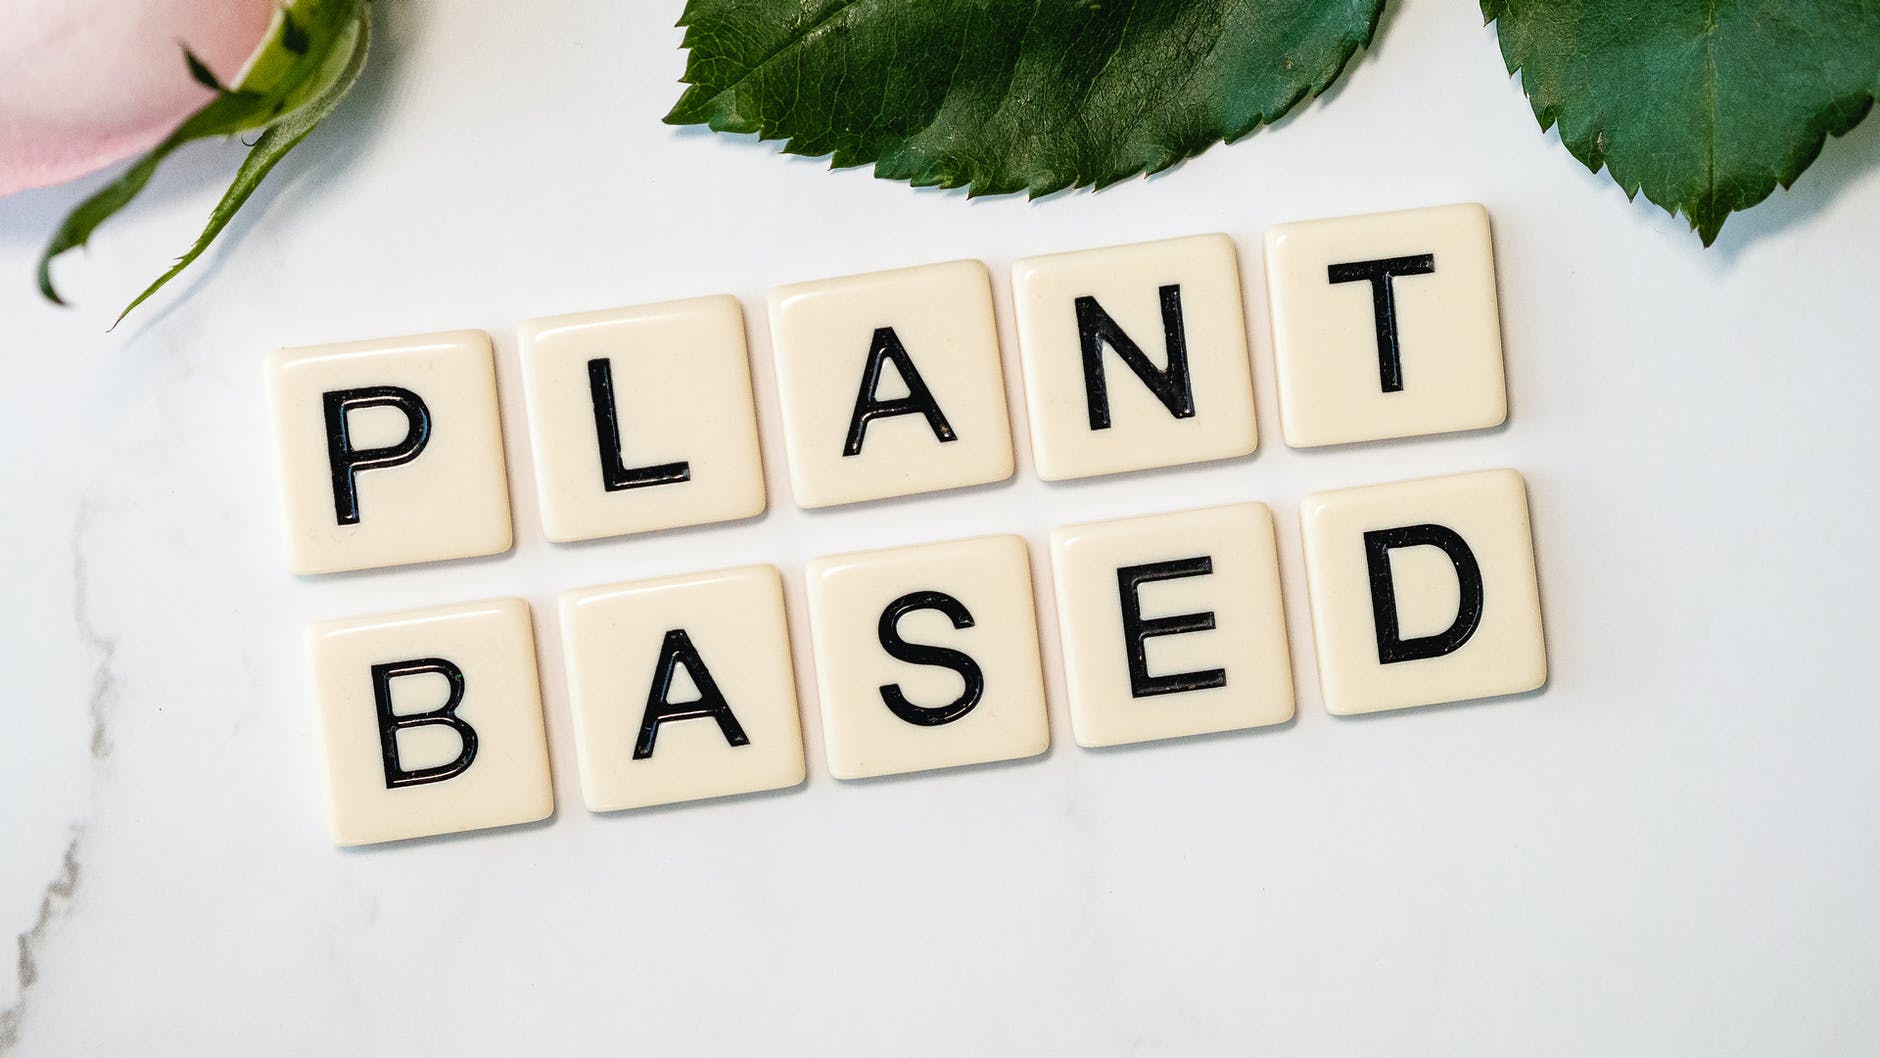 Scrabble tiles spelling out "Plant Based"